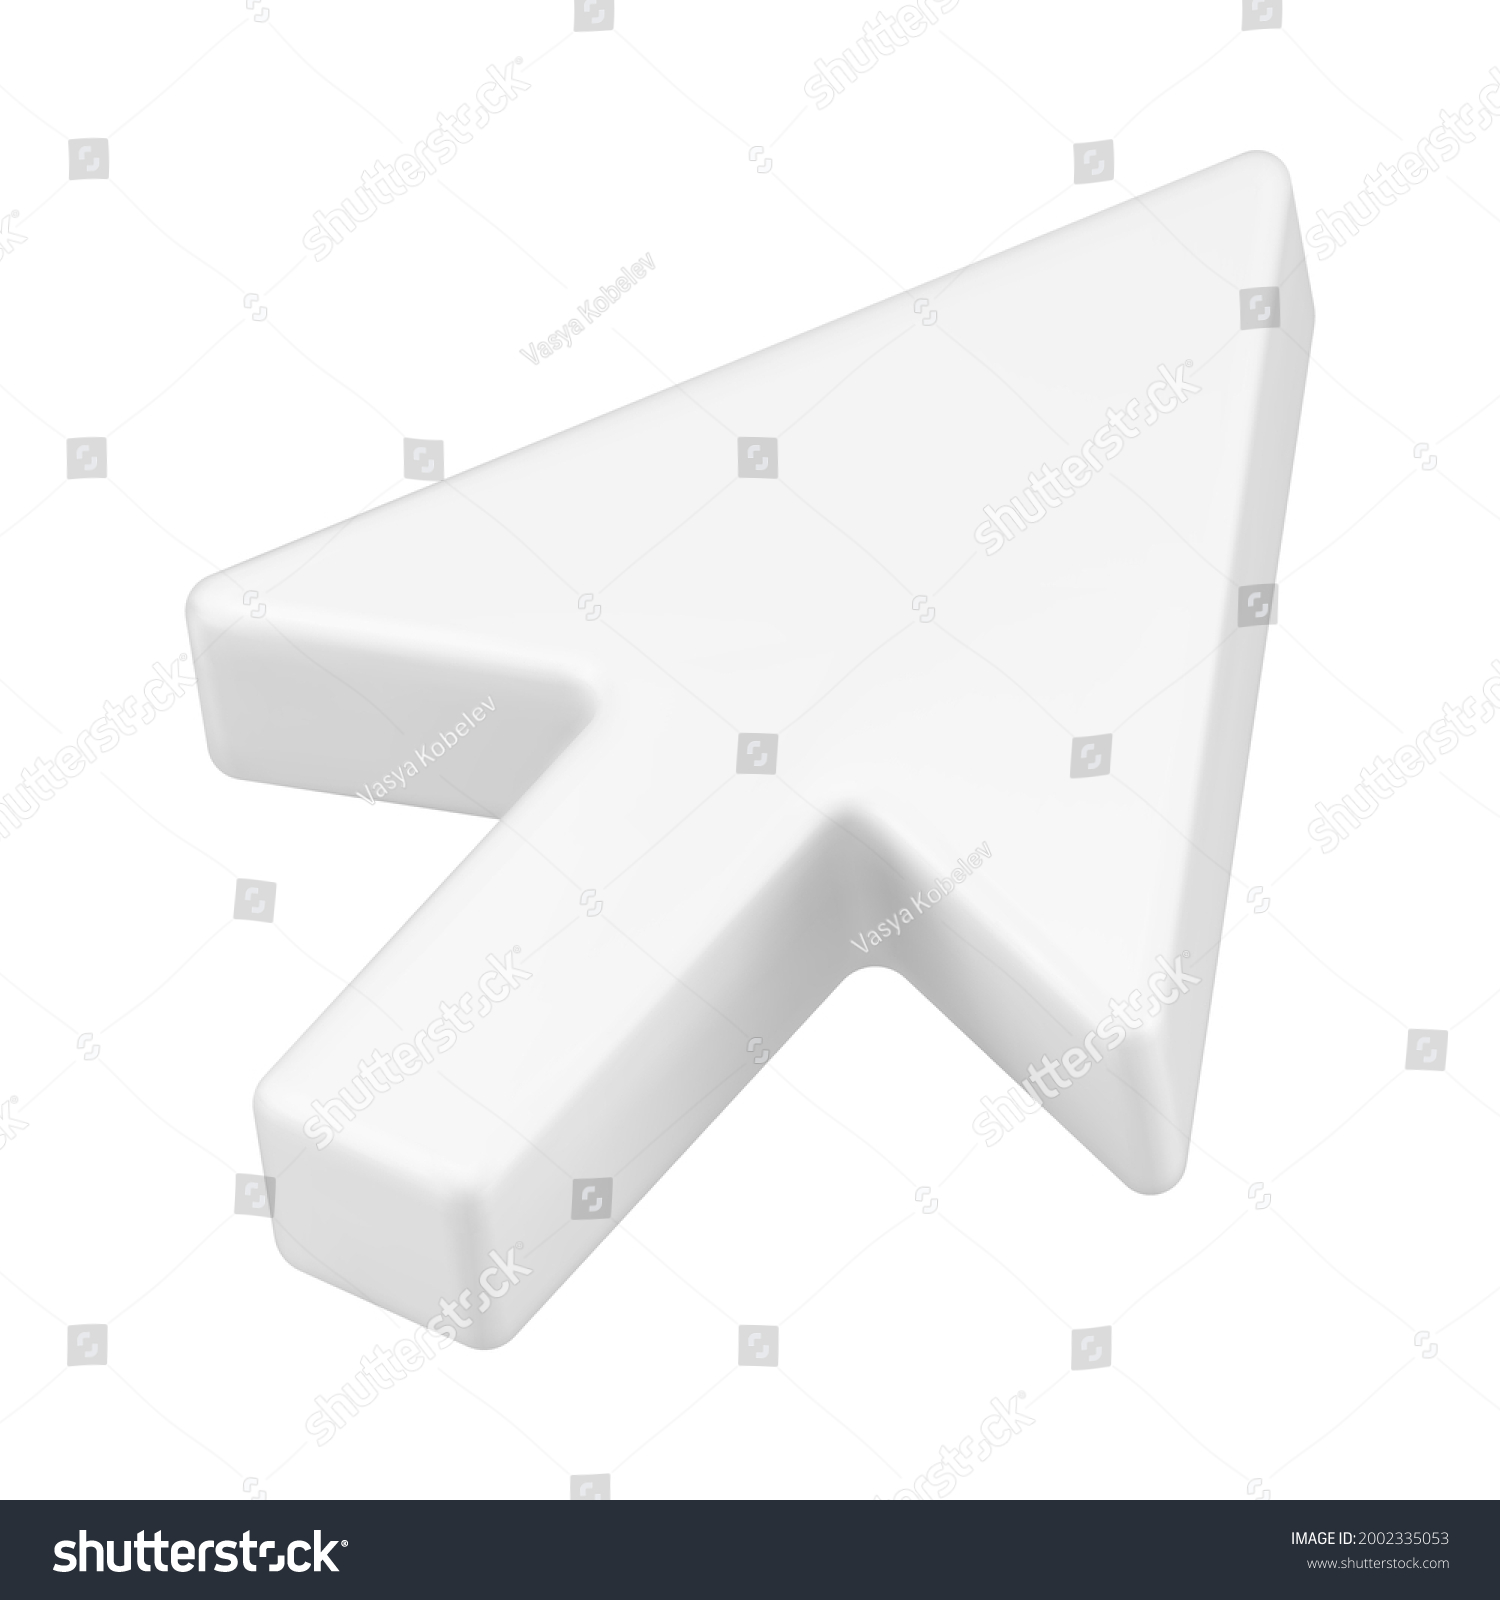 White arrow pointer 3d realistic icon. Geometric mouse cursor for website. Realistic computer interface for choosing online actions. Corrector of right direction to goal. Vector illustration #2002335053